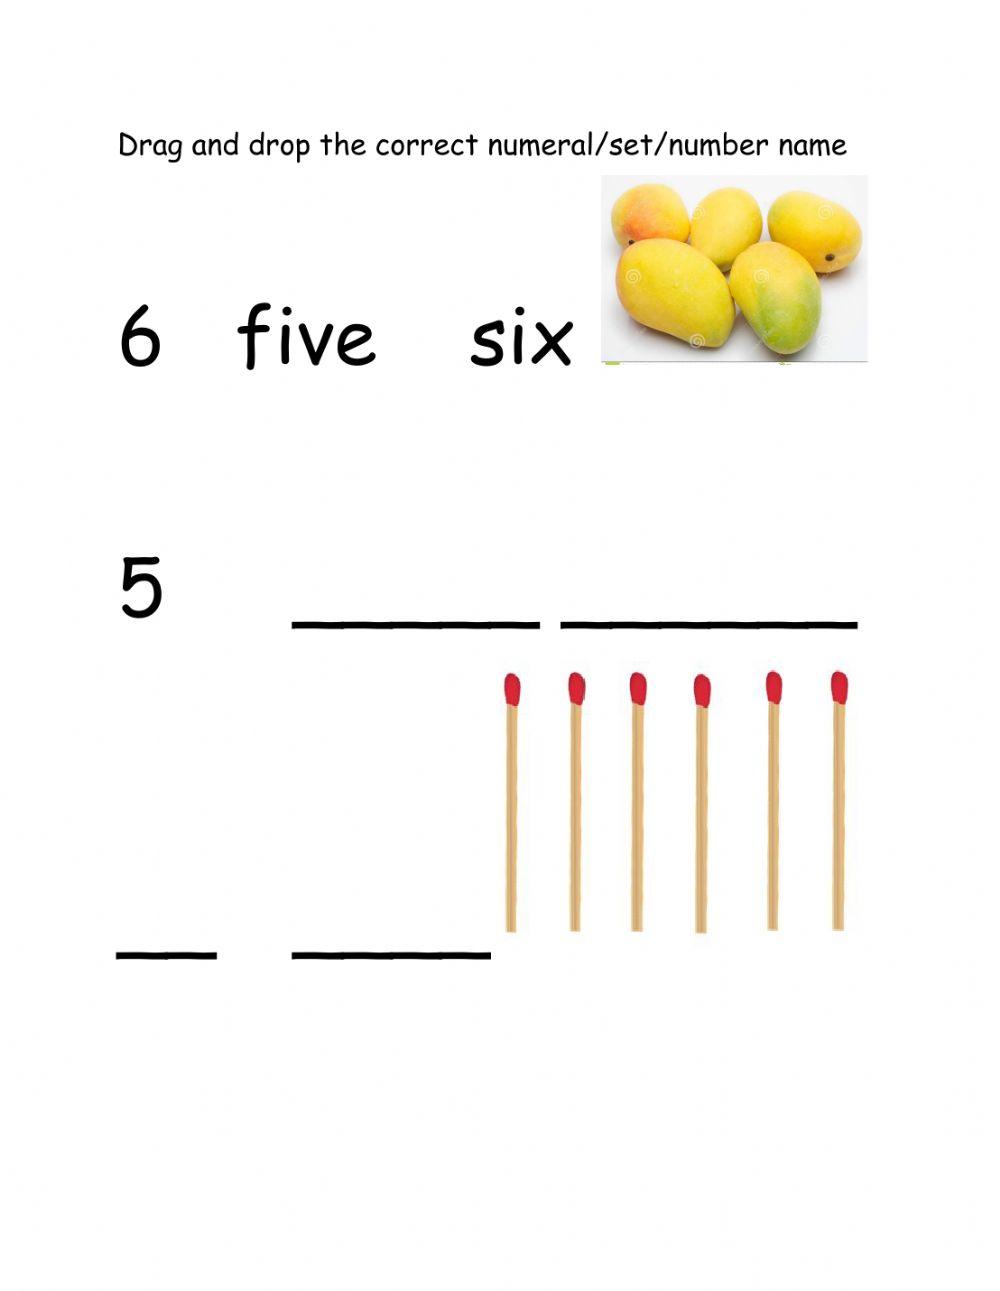 Numbers 5 and 6